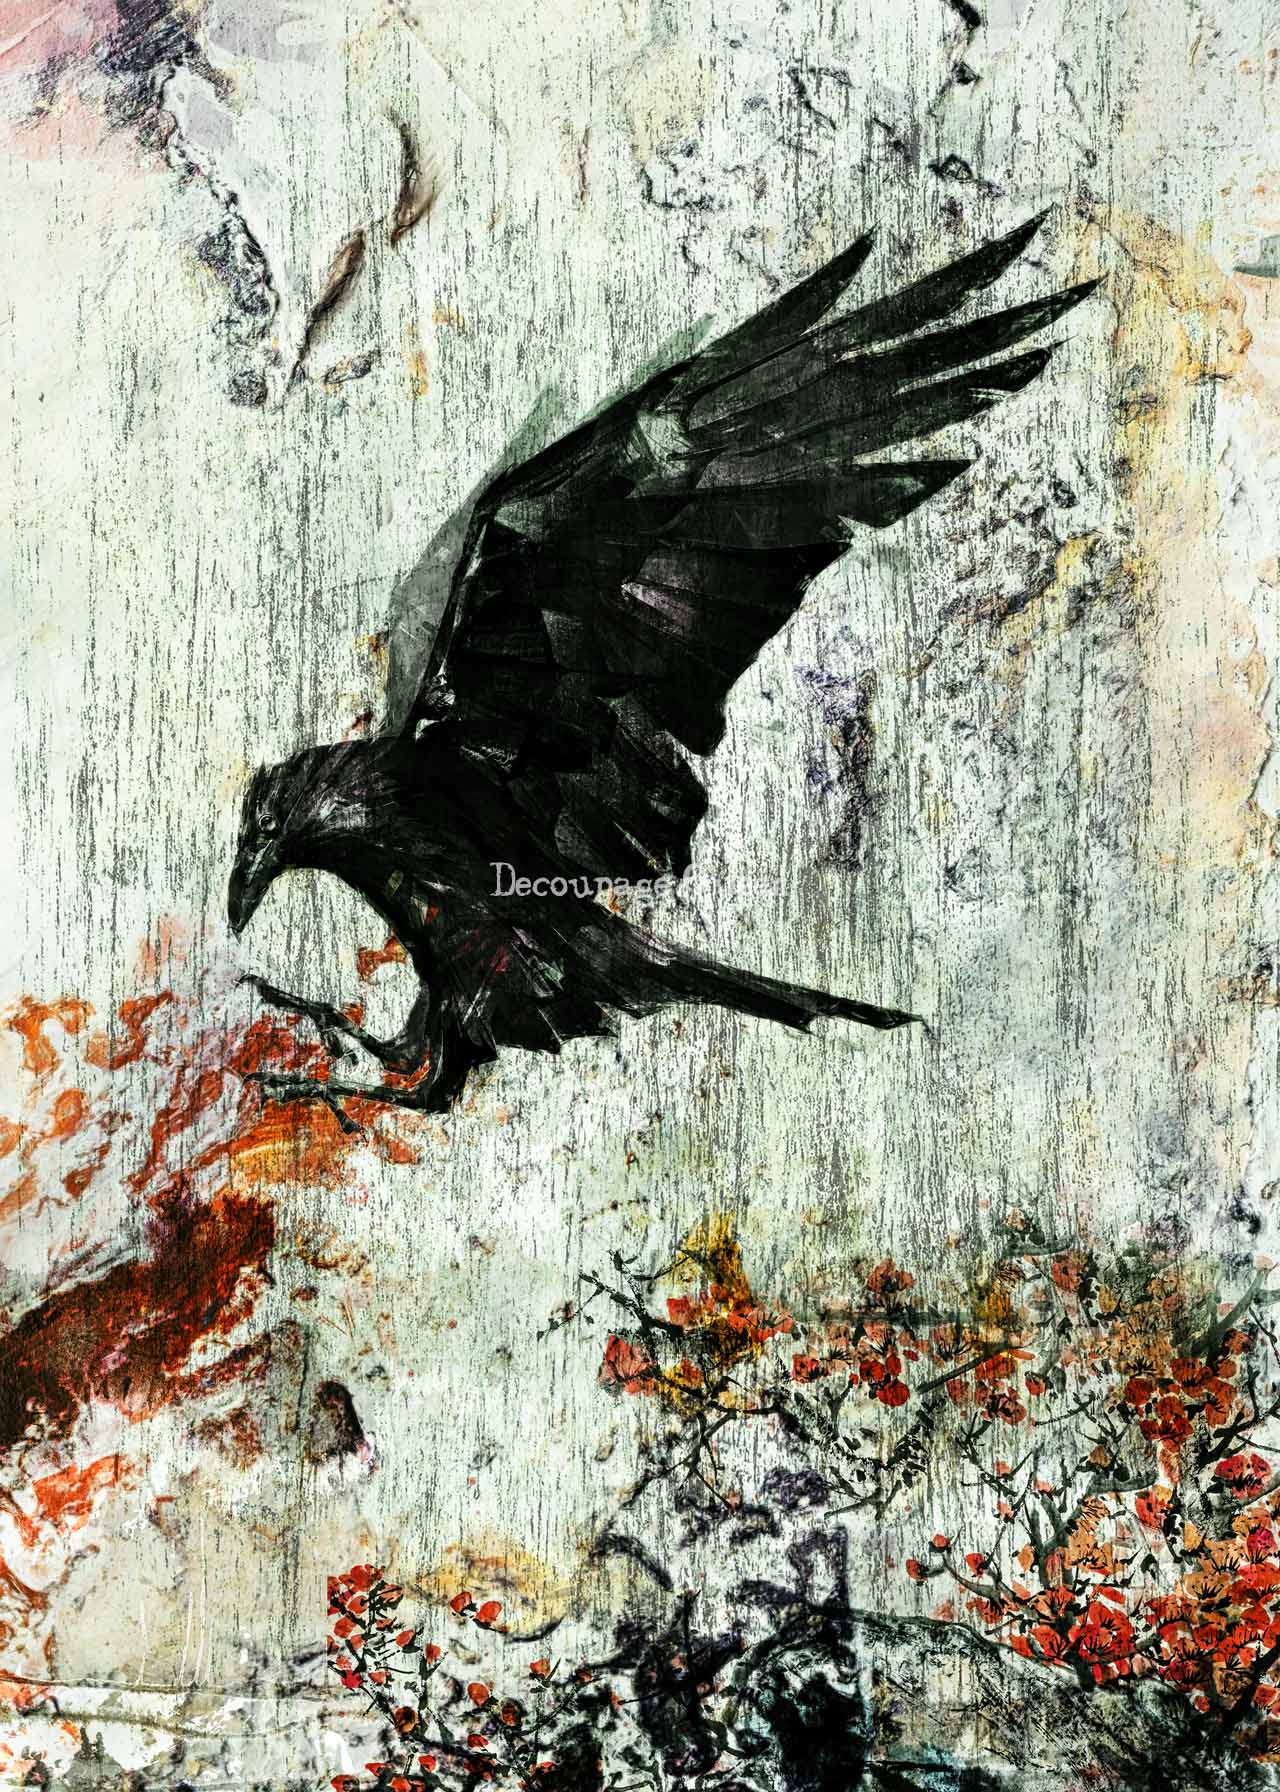 Decoupage Queen Rice Paper Quoth the Raven by Andy Skinner A4